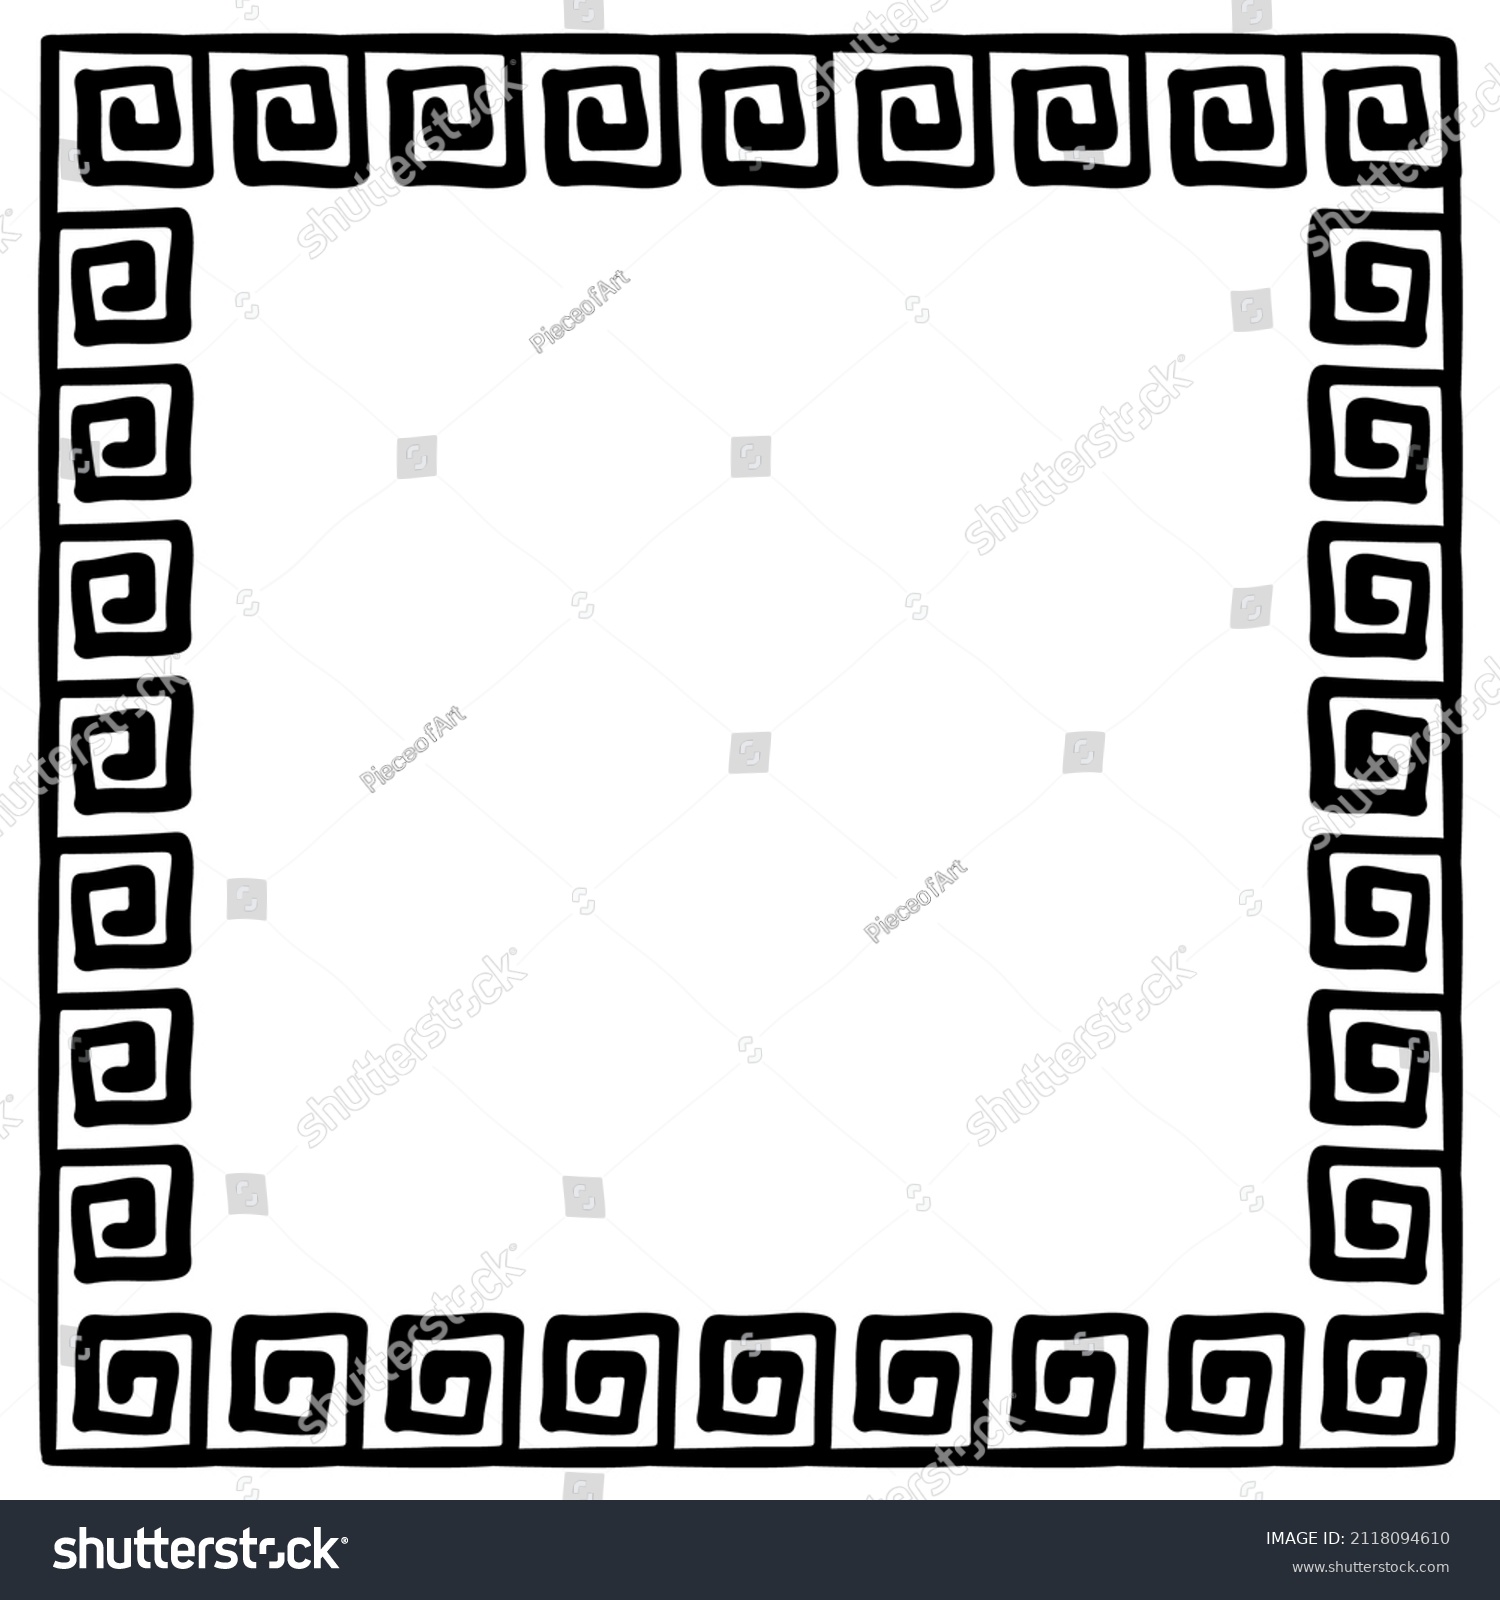 SVG of vector square frame with meander pattern. Greek key decorative border, constructed from continuous lines, shaped into a repeated motif. svg